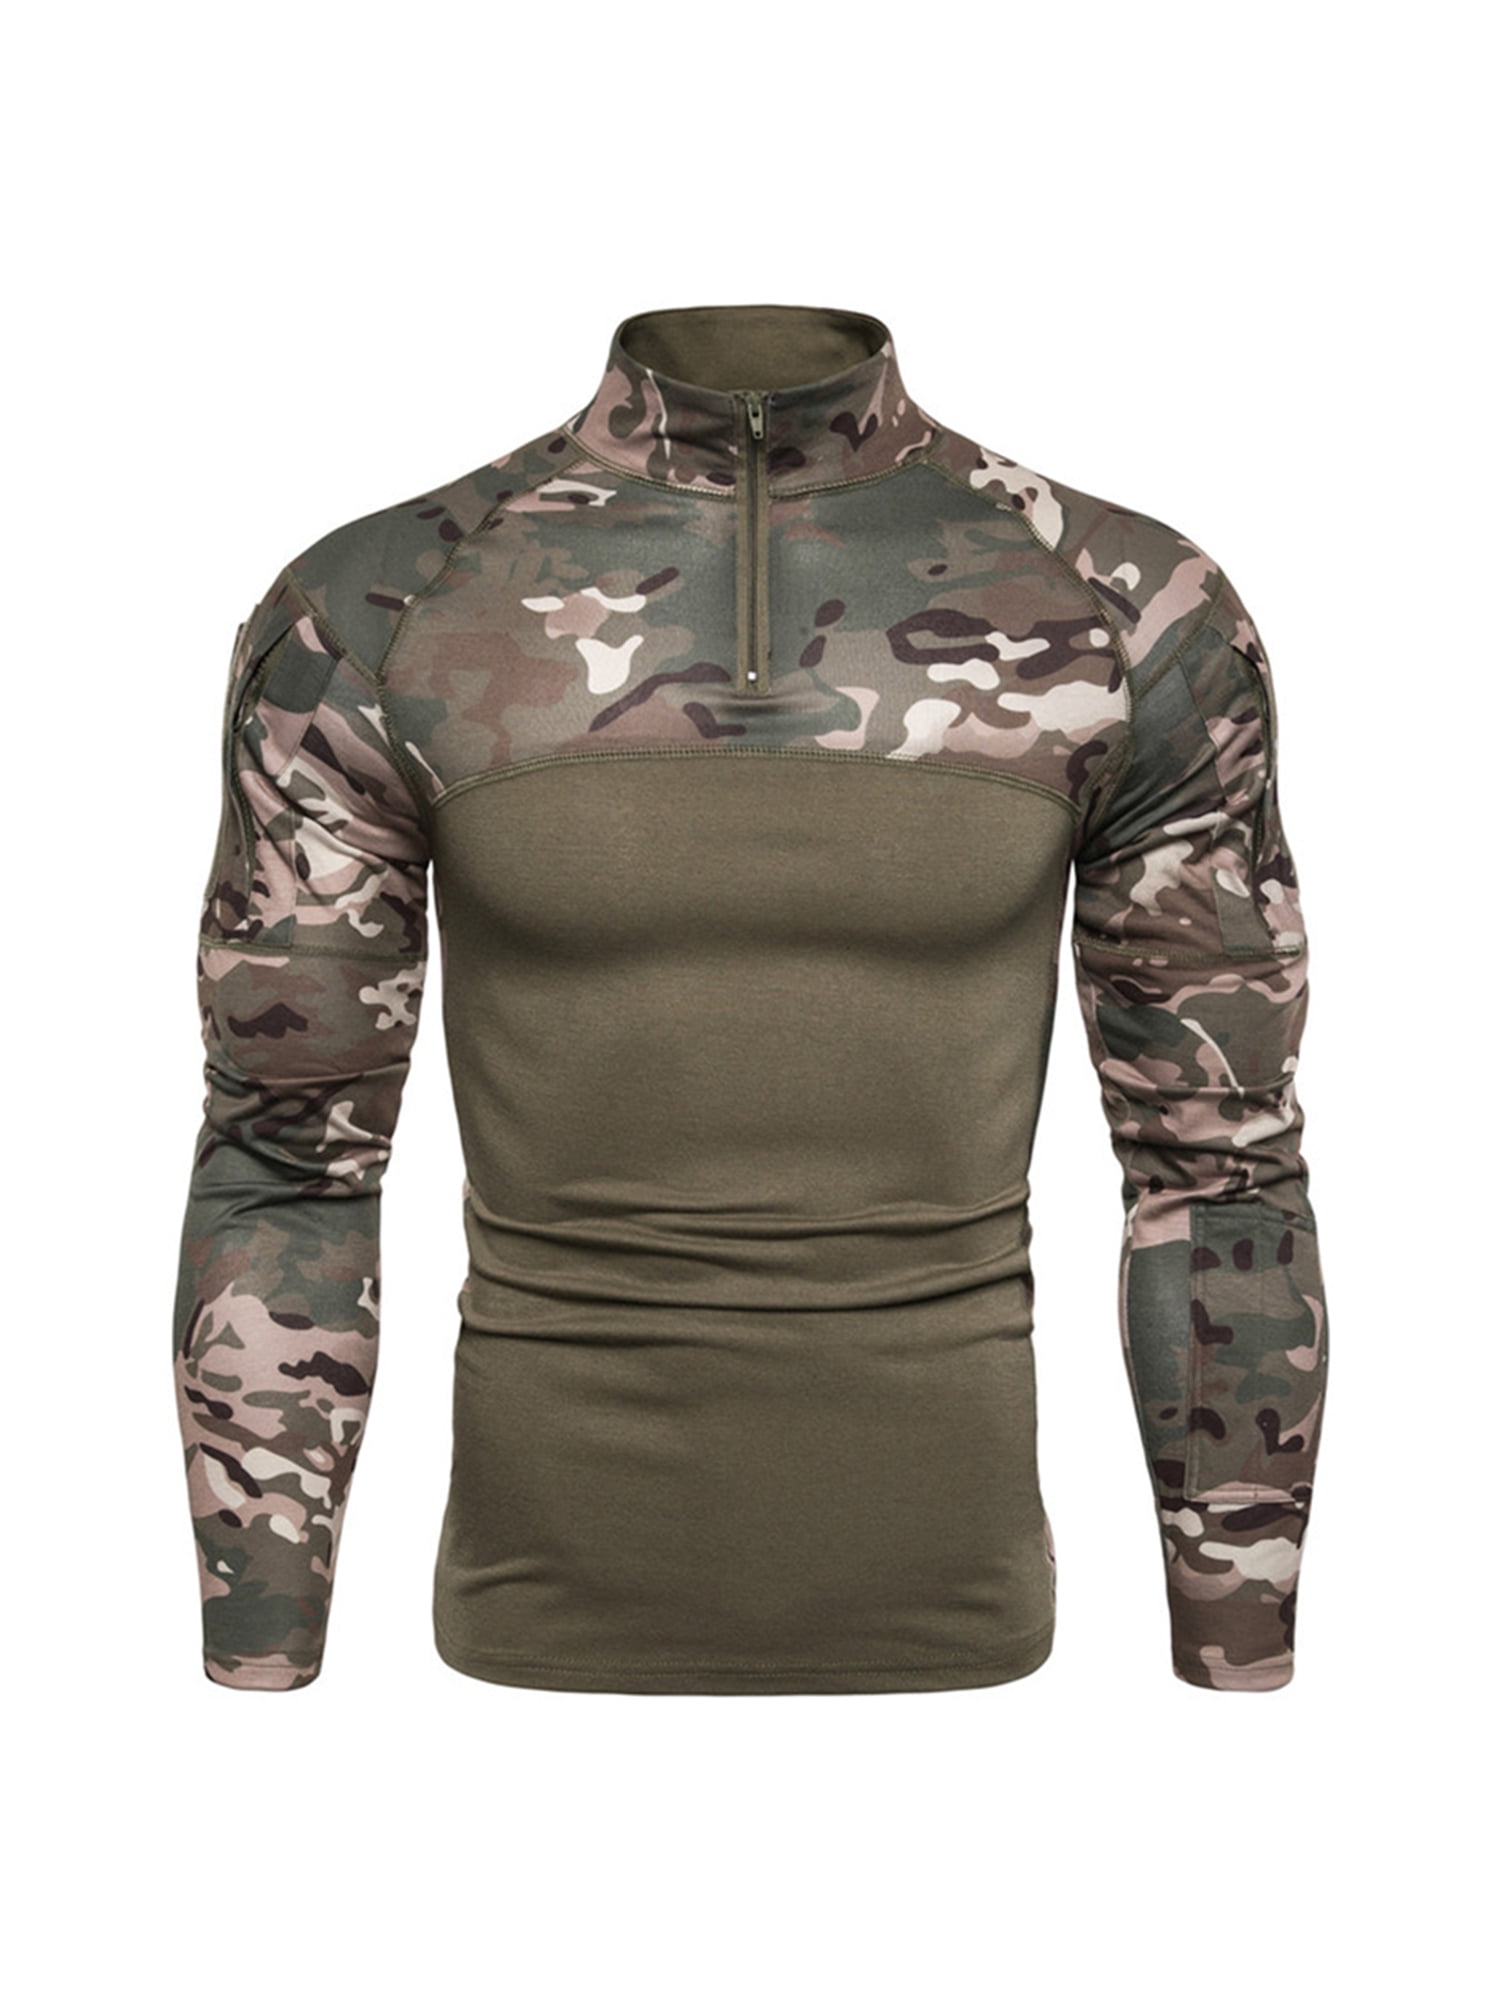 Men's Military Tactical T-shirts Outdoor Hunting Combat Shirts Sportswear Tops 